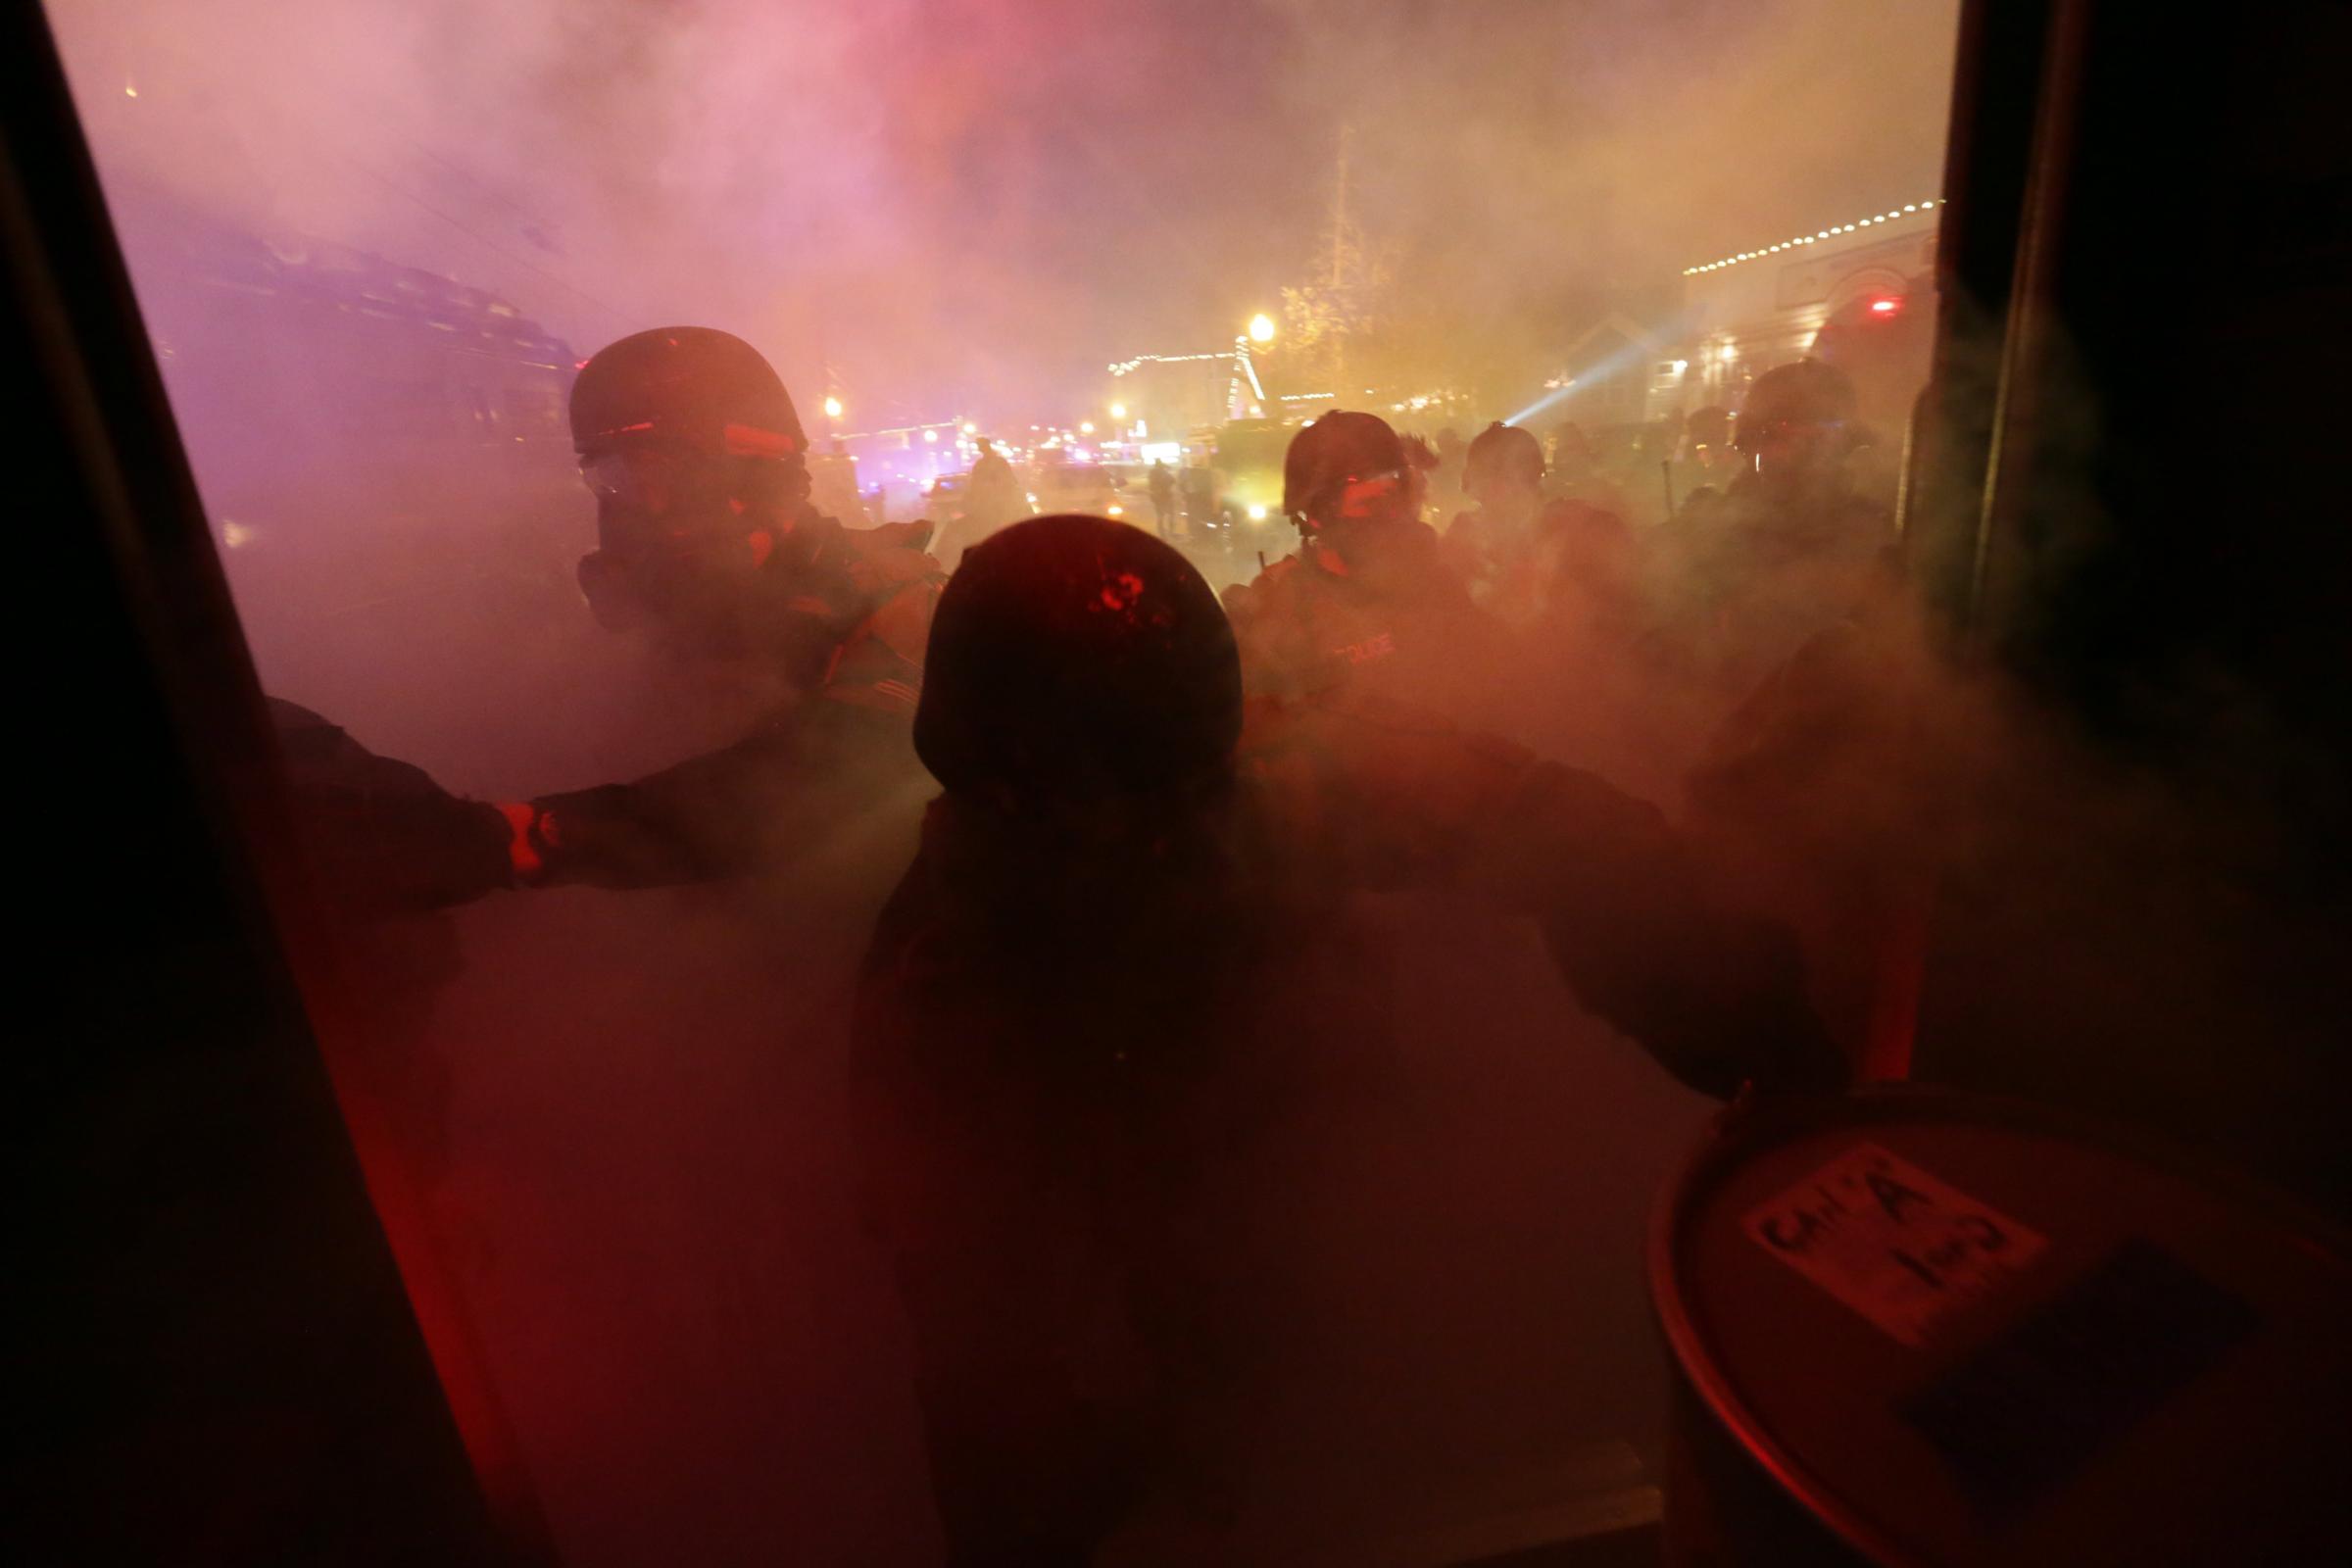 Ferguson erupts in violence after Grand Jury decision